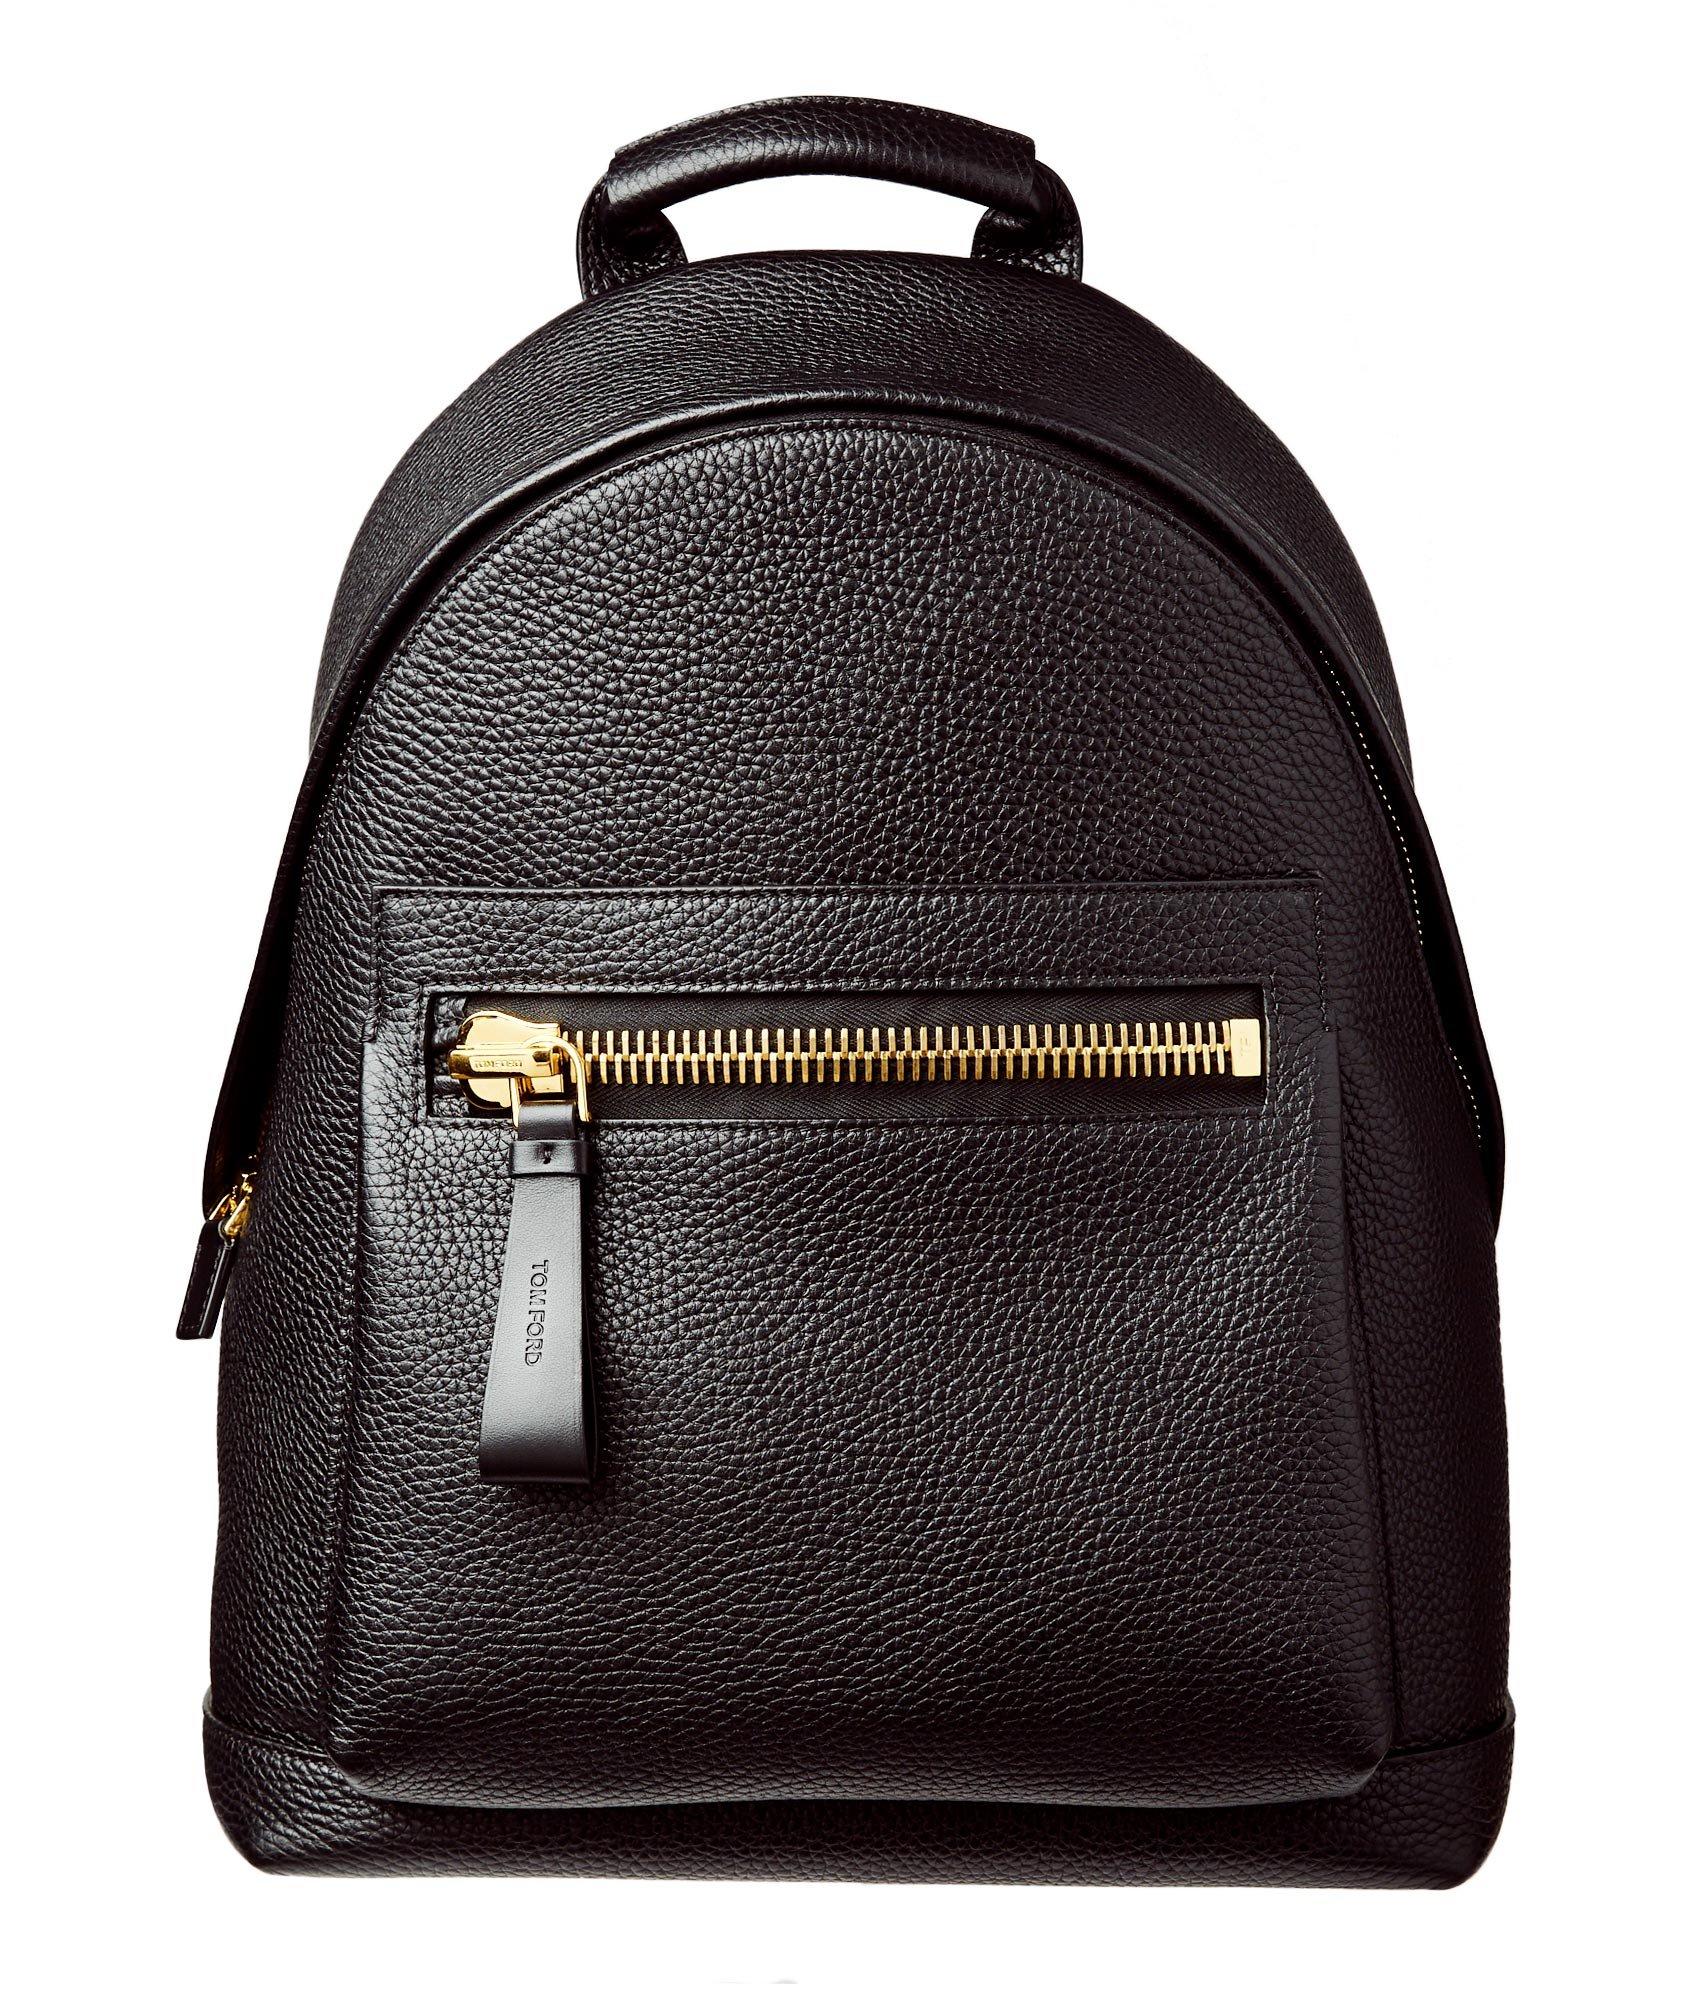 Buckley Leather Backpack image 0